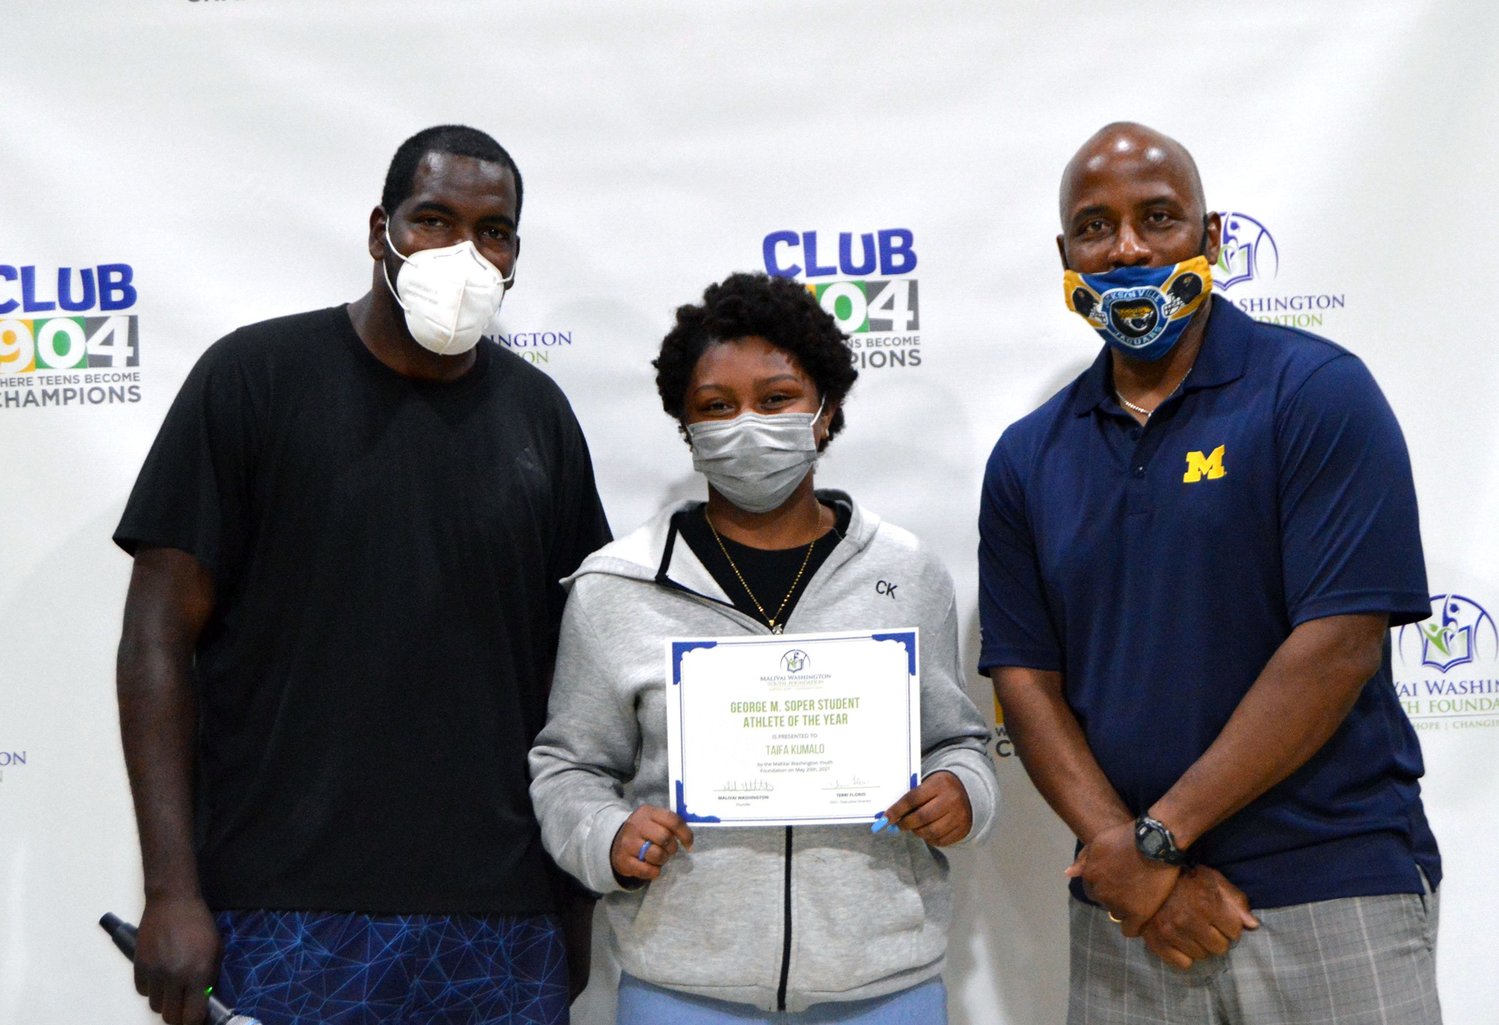 Taifa Kumalo, who received the George M. Soper Student Athlete of the Year Award, stands with foundation tennis director Marc, left, and MaliVai Washington, right.